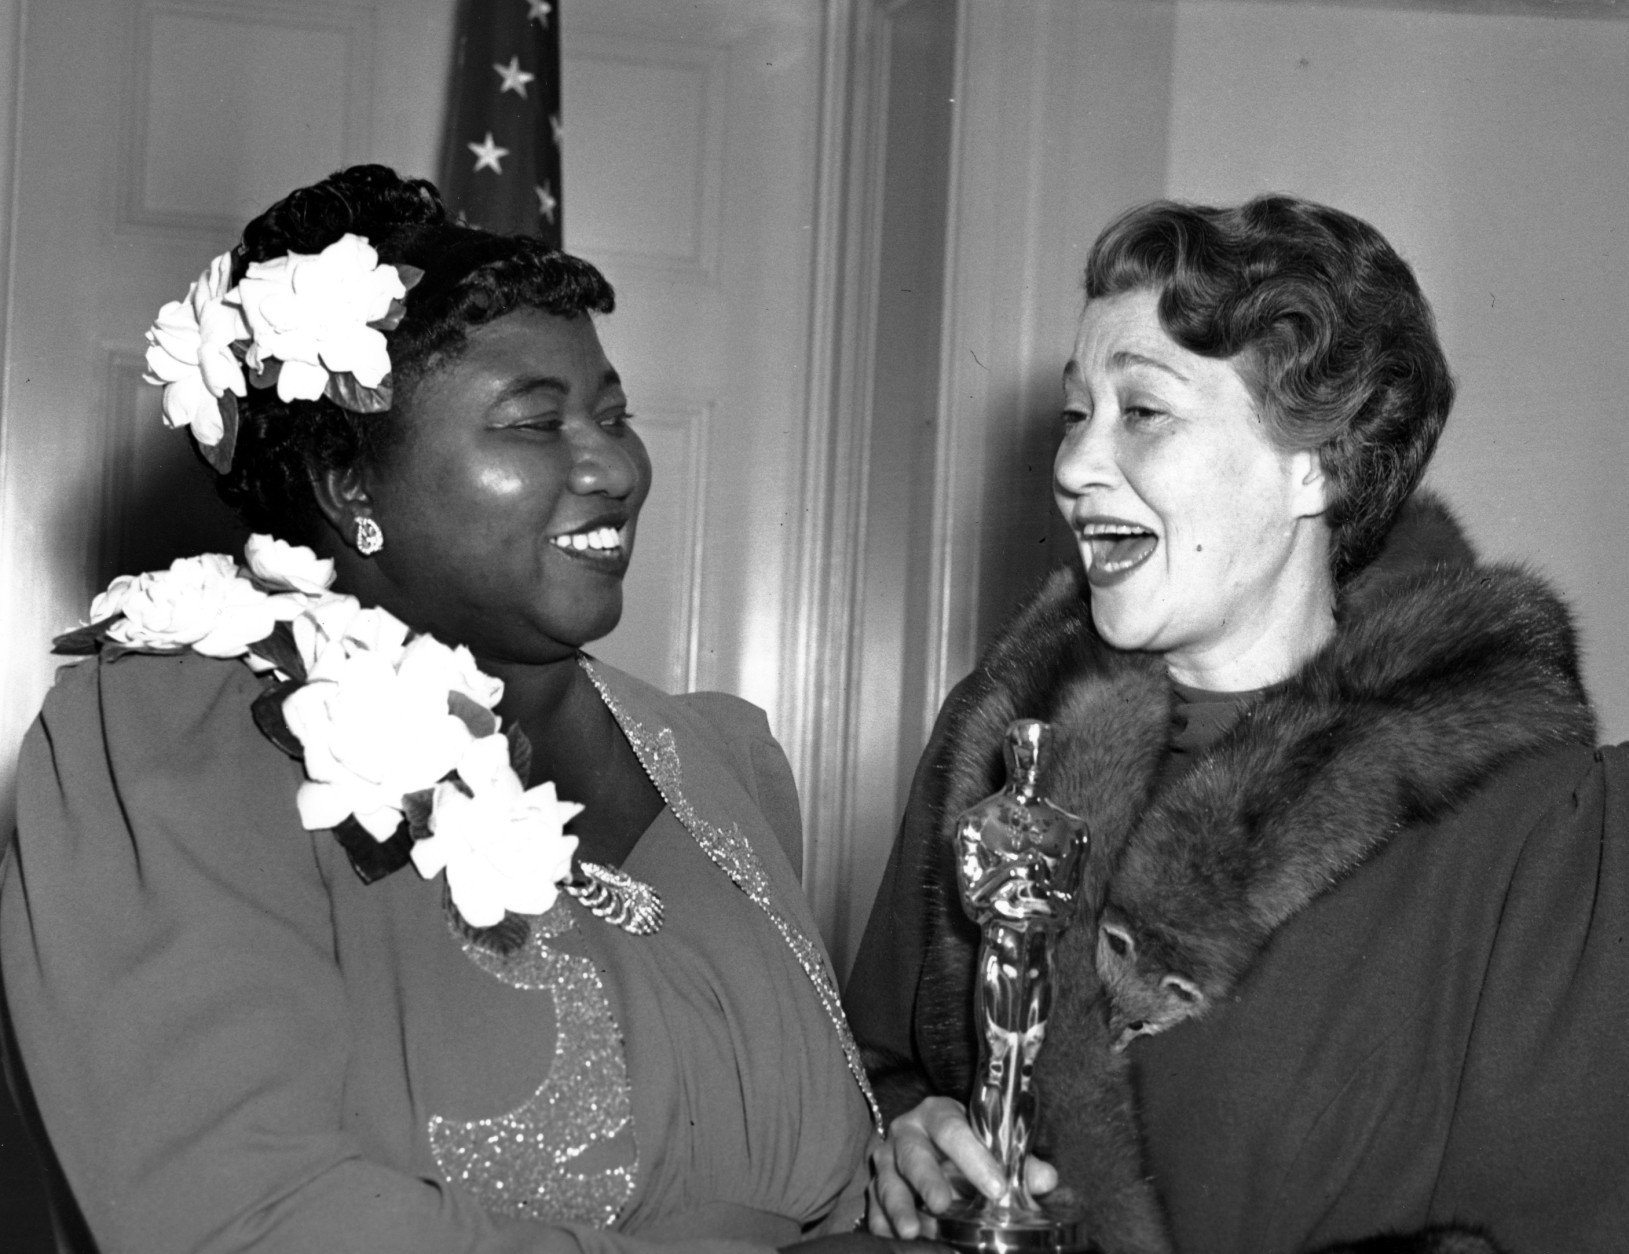 Hattie McDaniel, left, was given the Motion Picture Academy award for the best performance of an actress in a supporting role in 1939 for her work as "Mammy" in the film version of "Gone With the Wind"  on Feb. 29, 1940 in Los Angeles, Calif.  The presentation of the award was given by actress Fay Bainter, right.  (AP Photo)